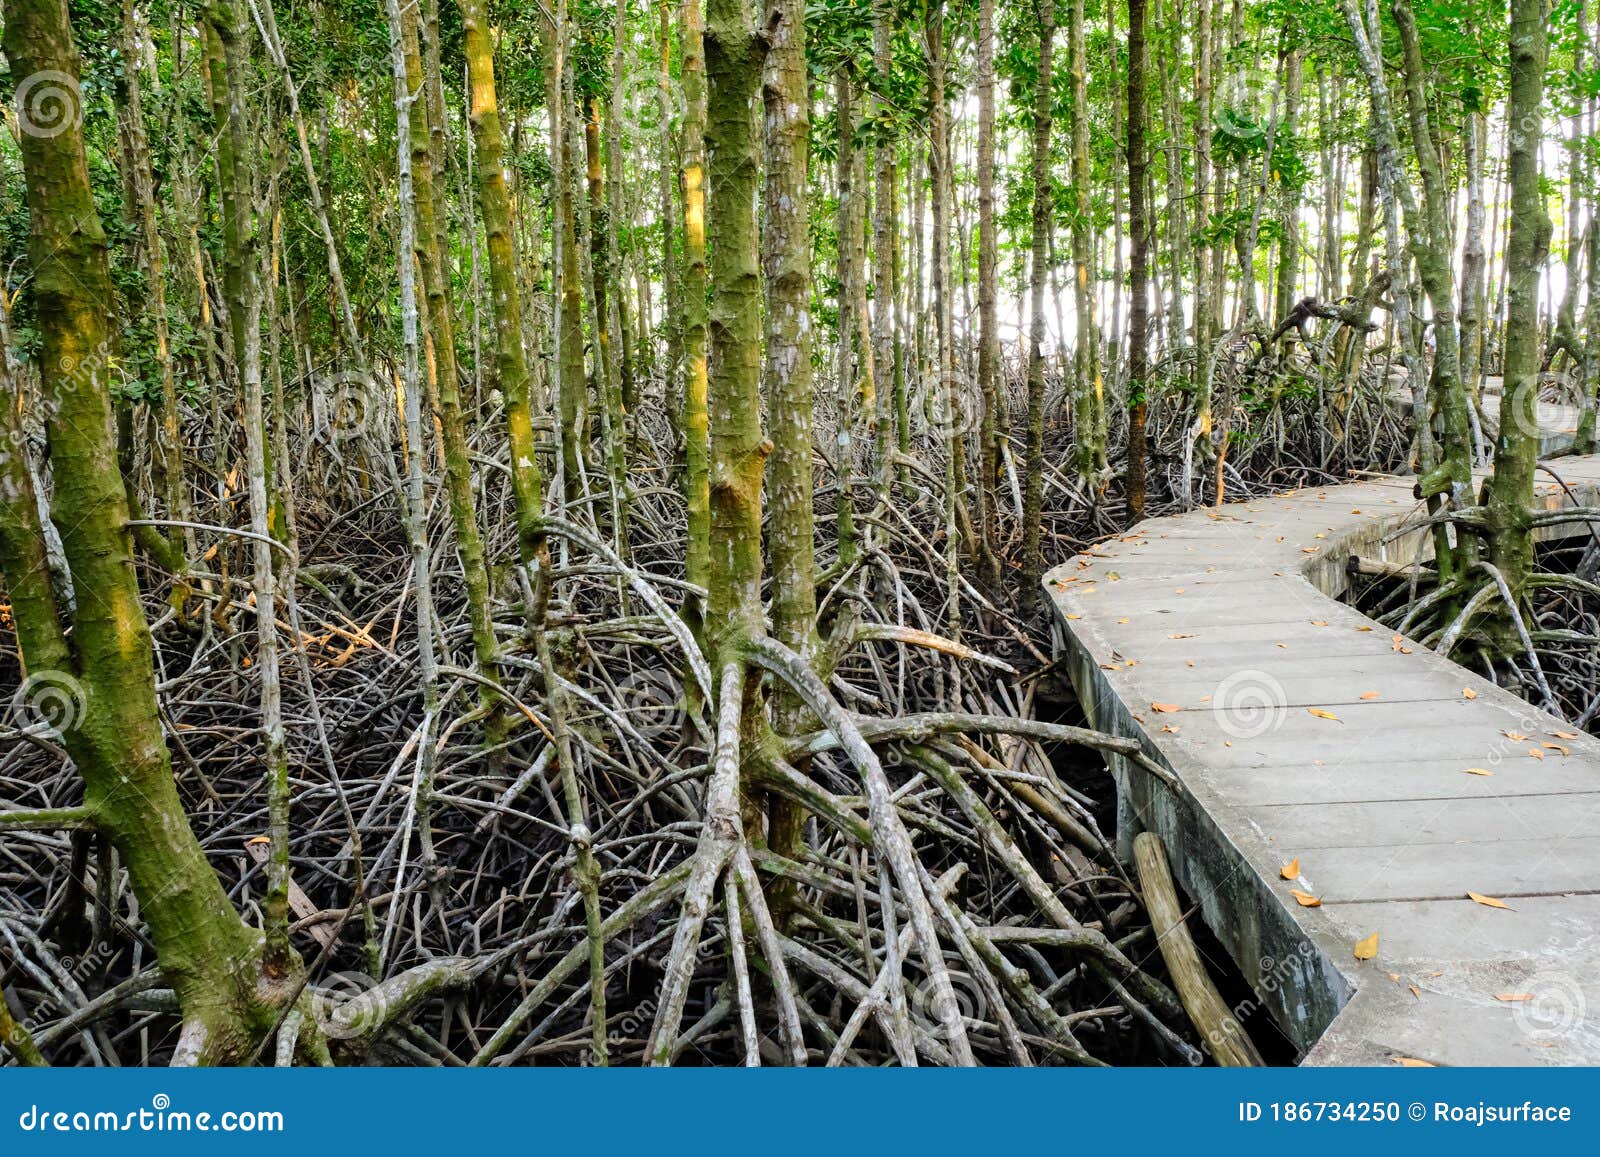 Mangrove Forest Tree Near Sea Wooden Walk Path Way For Tourism Fresh